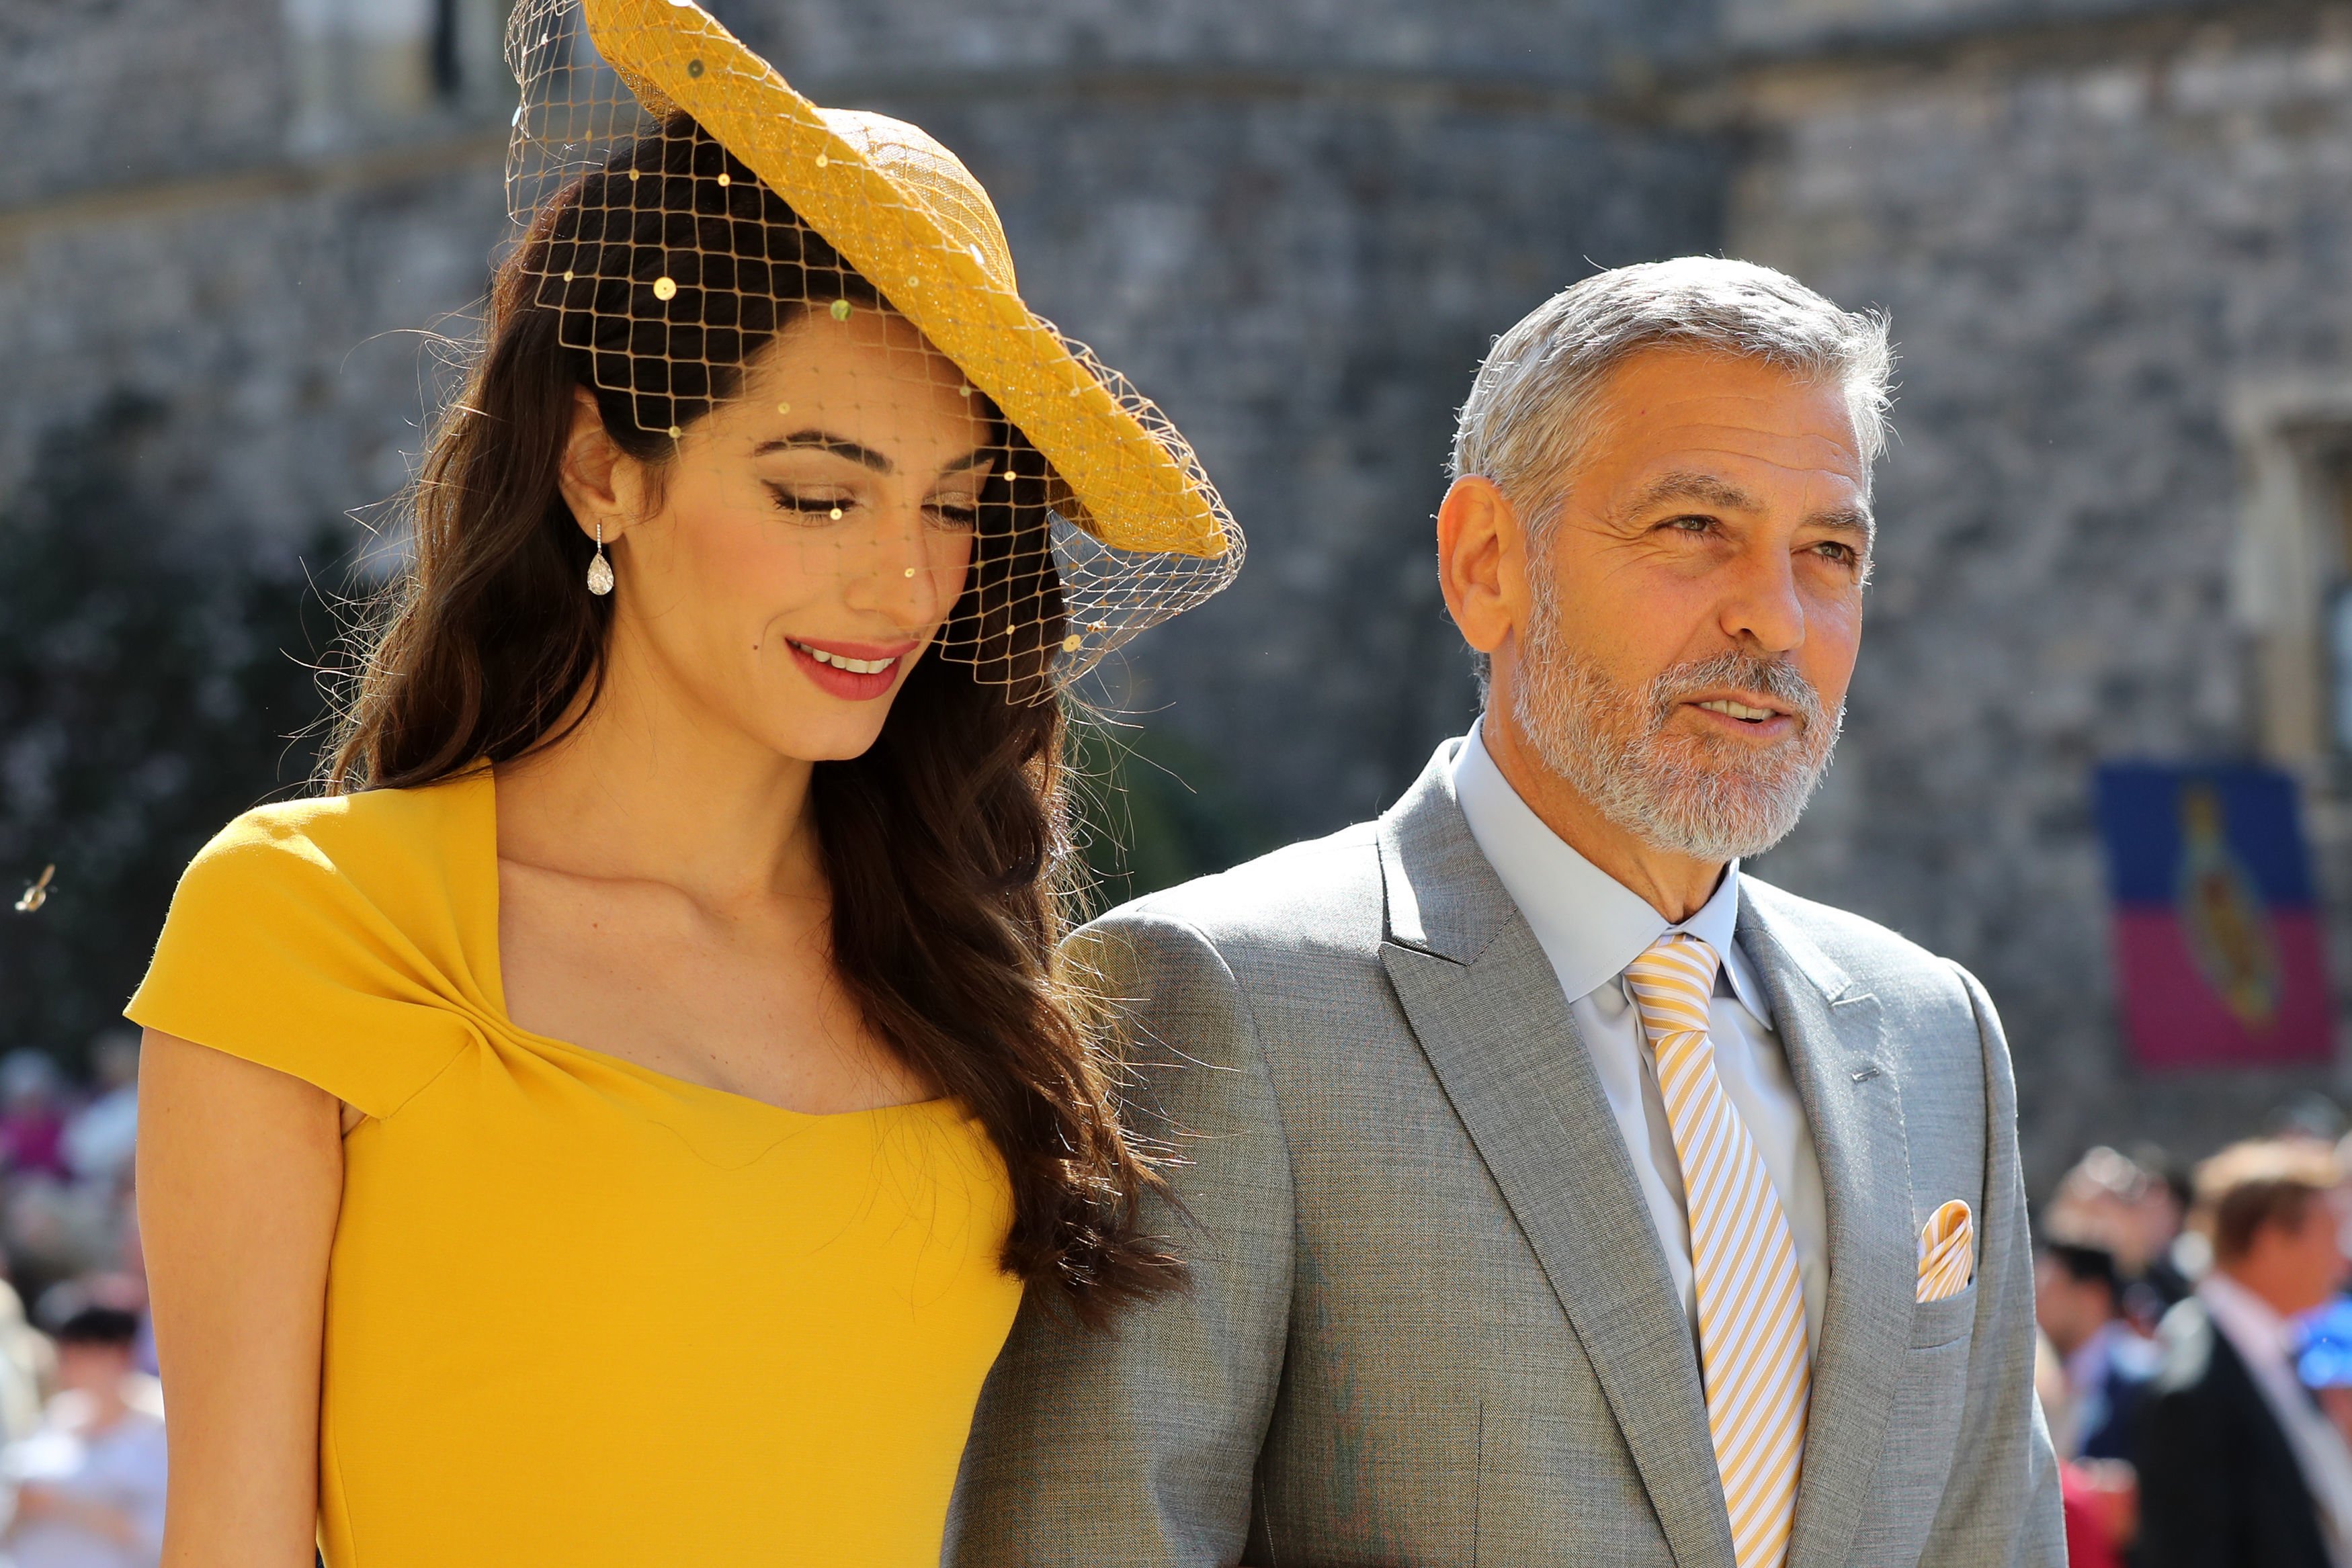 Amal Clooney and George Clooney arriving at St George's Chapel at Windsor Castle for the wedding of Prince Harry and Meghan Markle on May 19, 2018 in Windsor, England. / Source: Getty Images